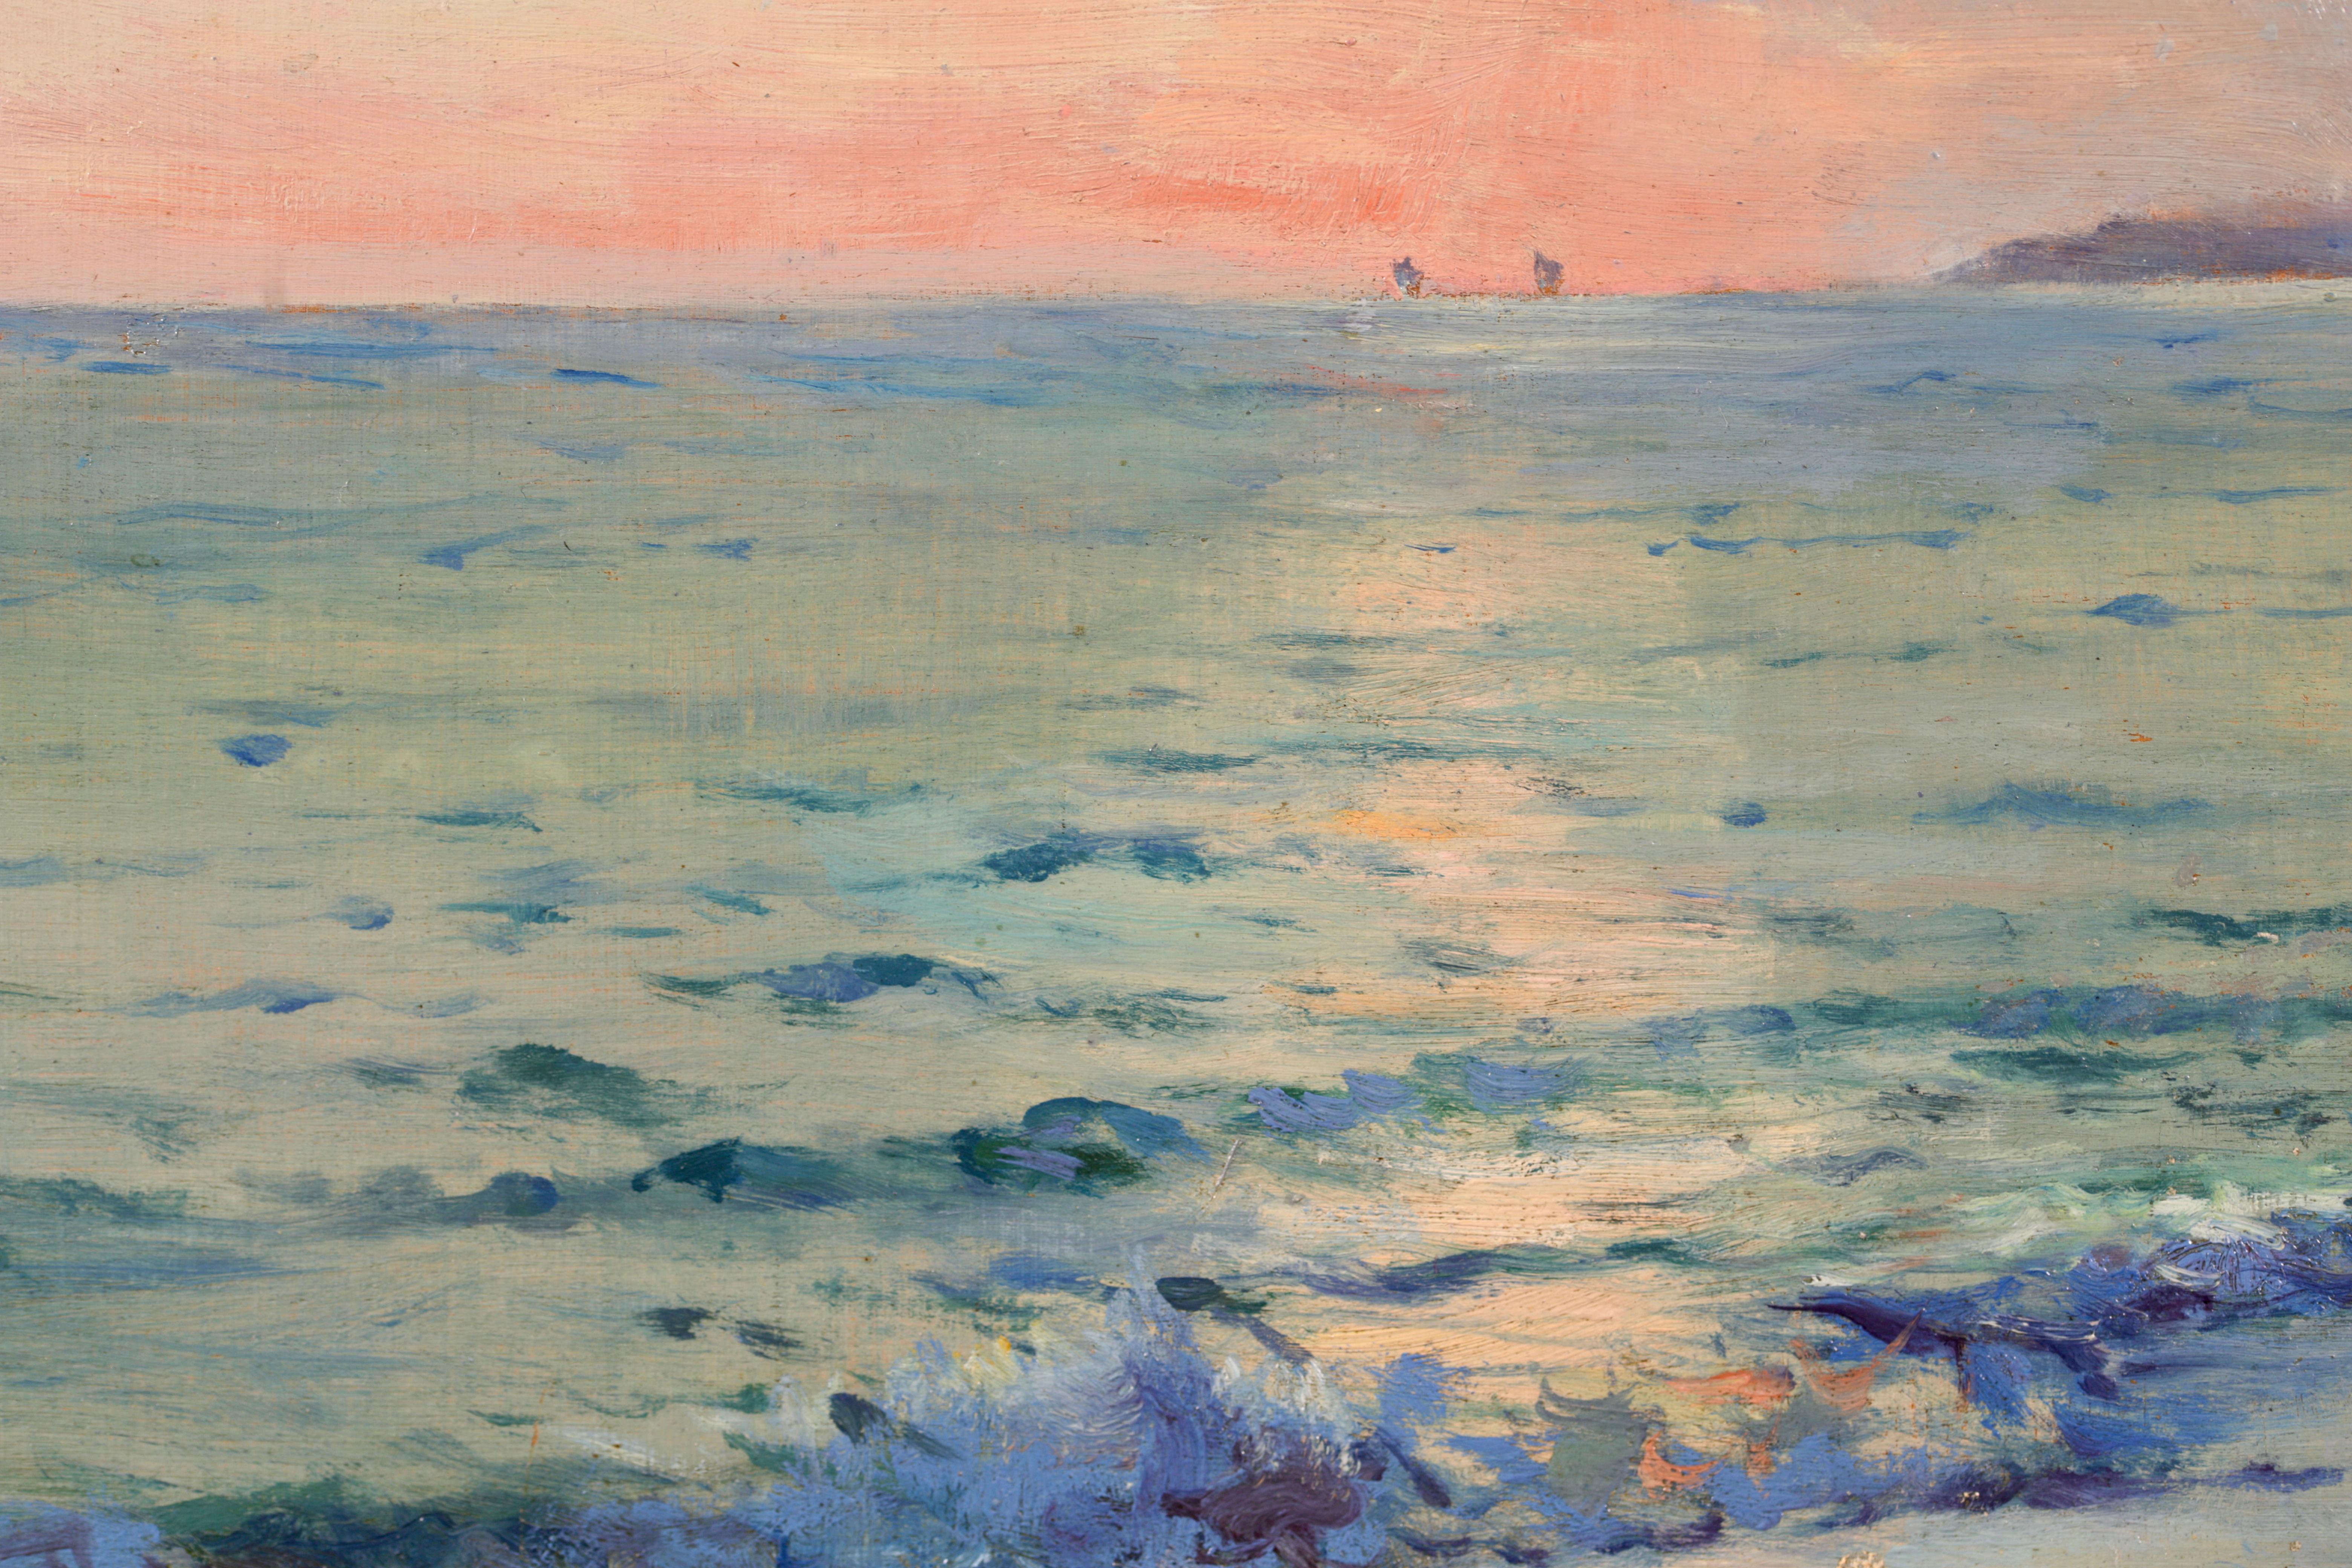 Sunset on the Coast - Impressionist Oil, Birds in Seacape by William Blair Bruce 7